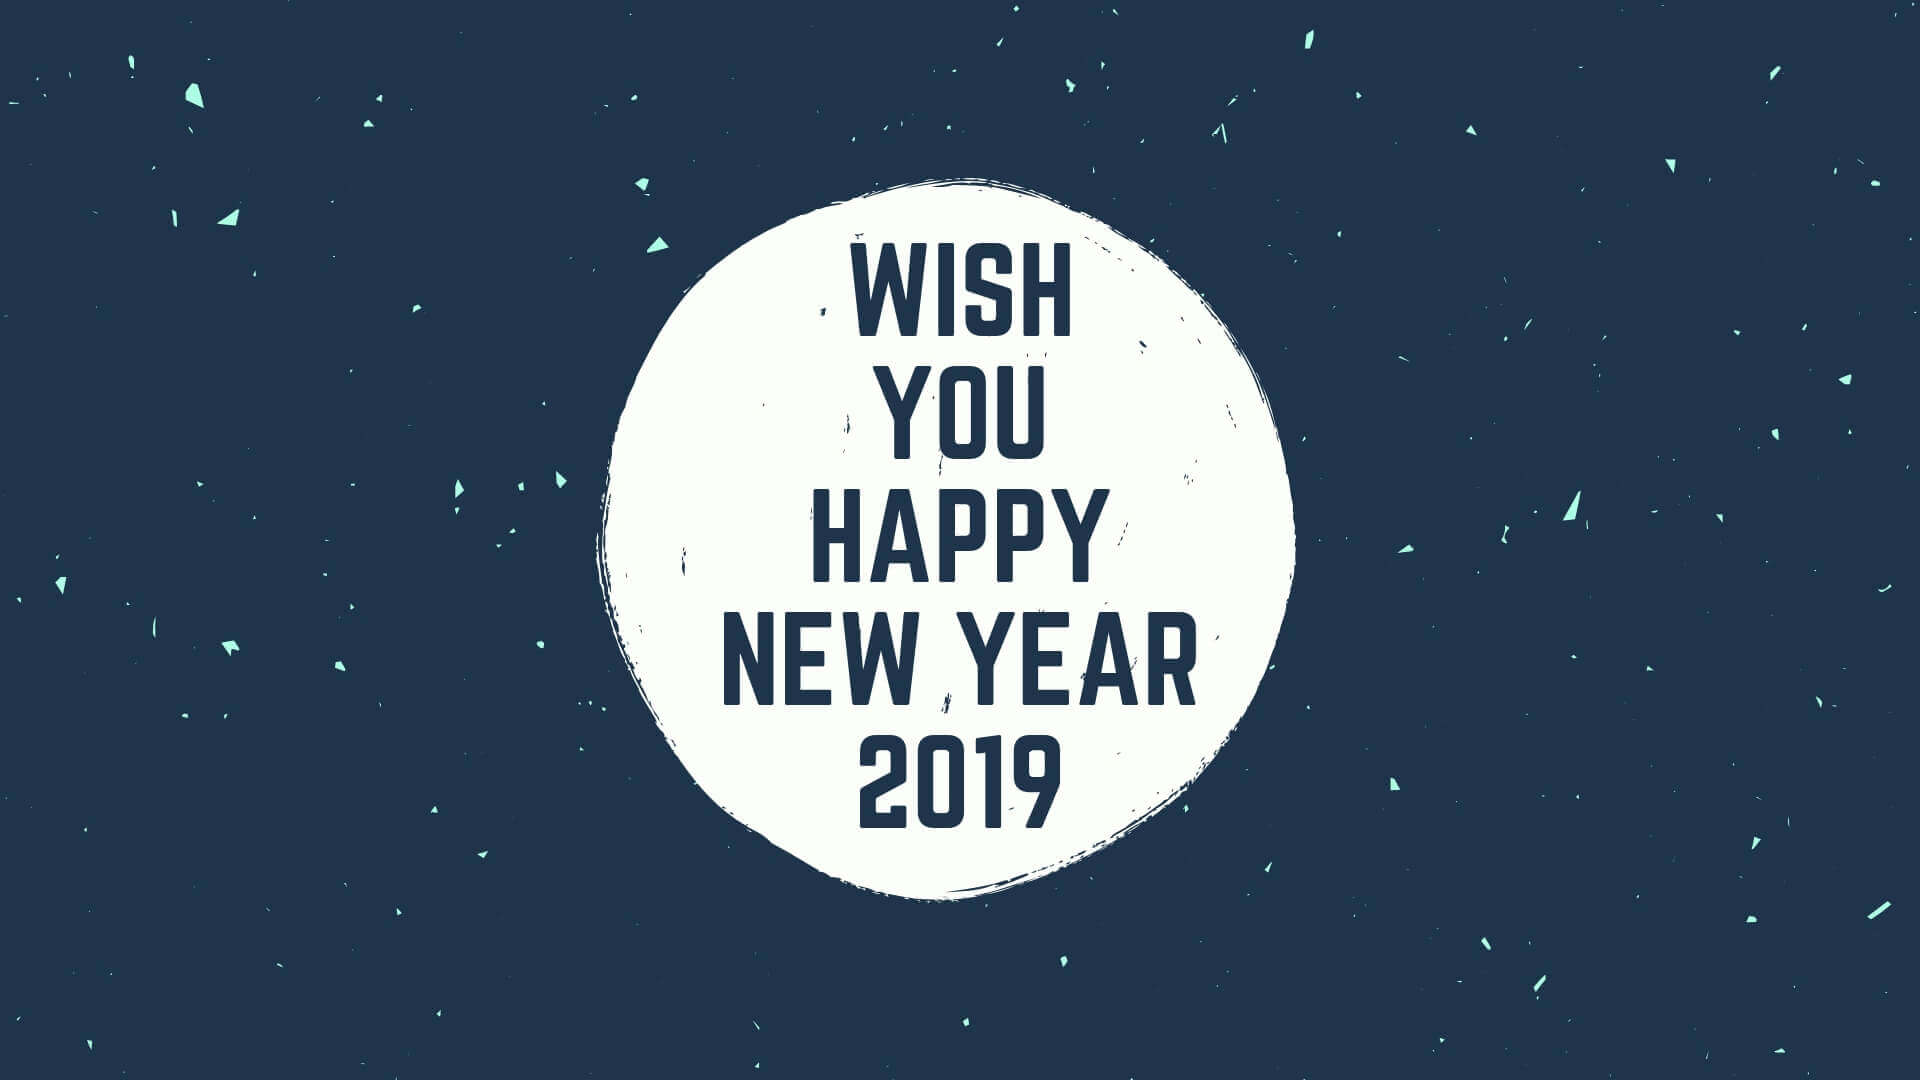 Happy New Year 2019 Image. New Year Picture 2019. Photo Download